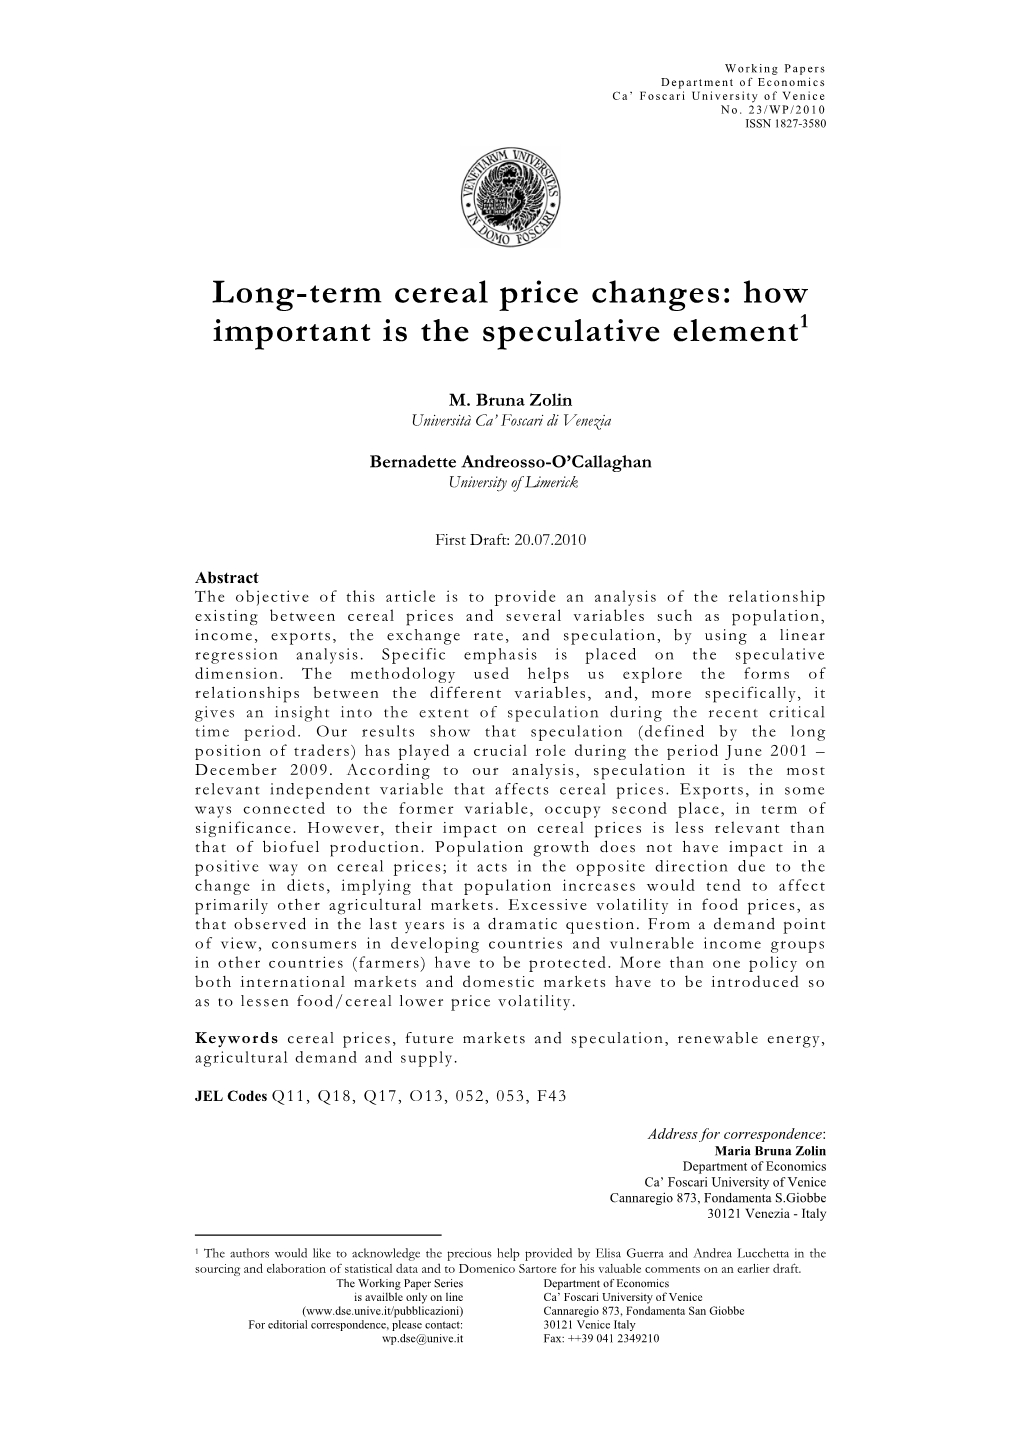 Long-Term Cereal Price Changes: How Important Is the Speculative Element1